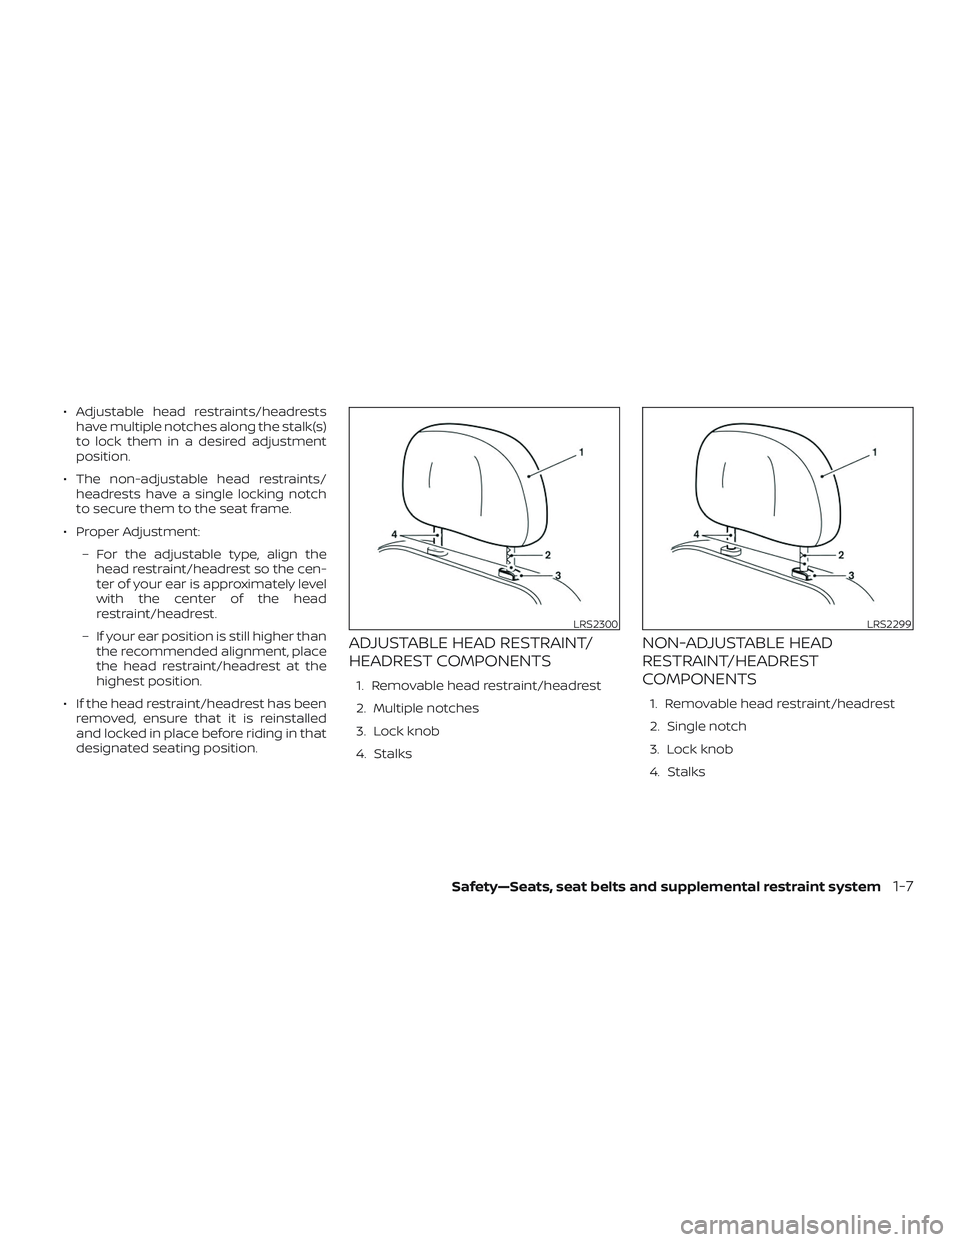 NISSAN MICRA 2019  Owner´s Manual ∙ Adjustable head restraints/headrestshave multiple notches along the stalk(s)
to lock them in a desired adjustment
position.
∙ The non-adjustable head restraints/ headrests have a single locking 